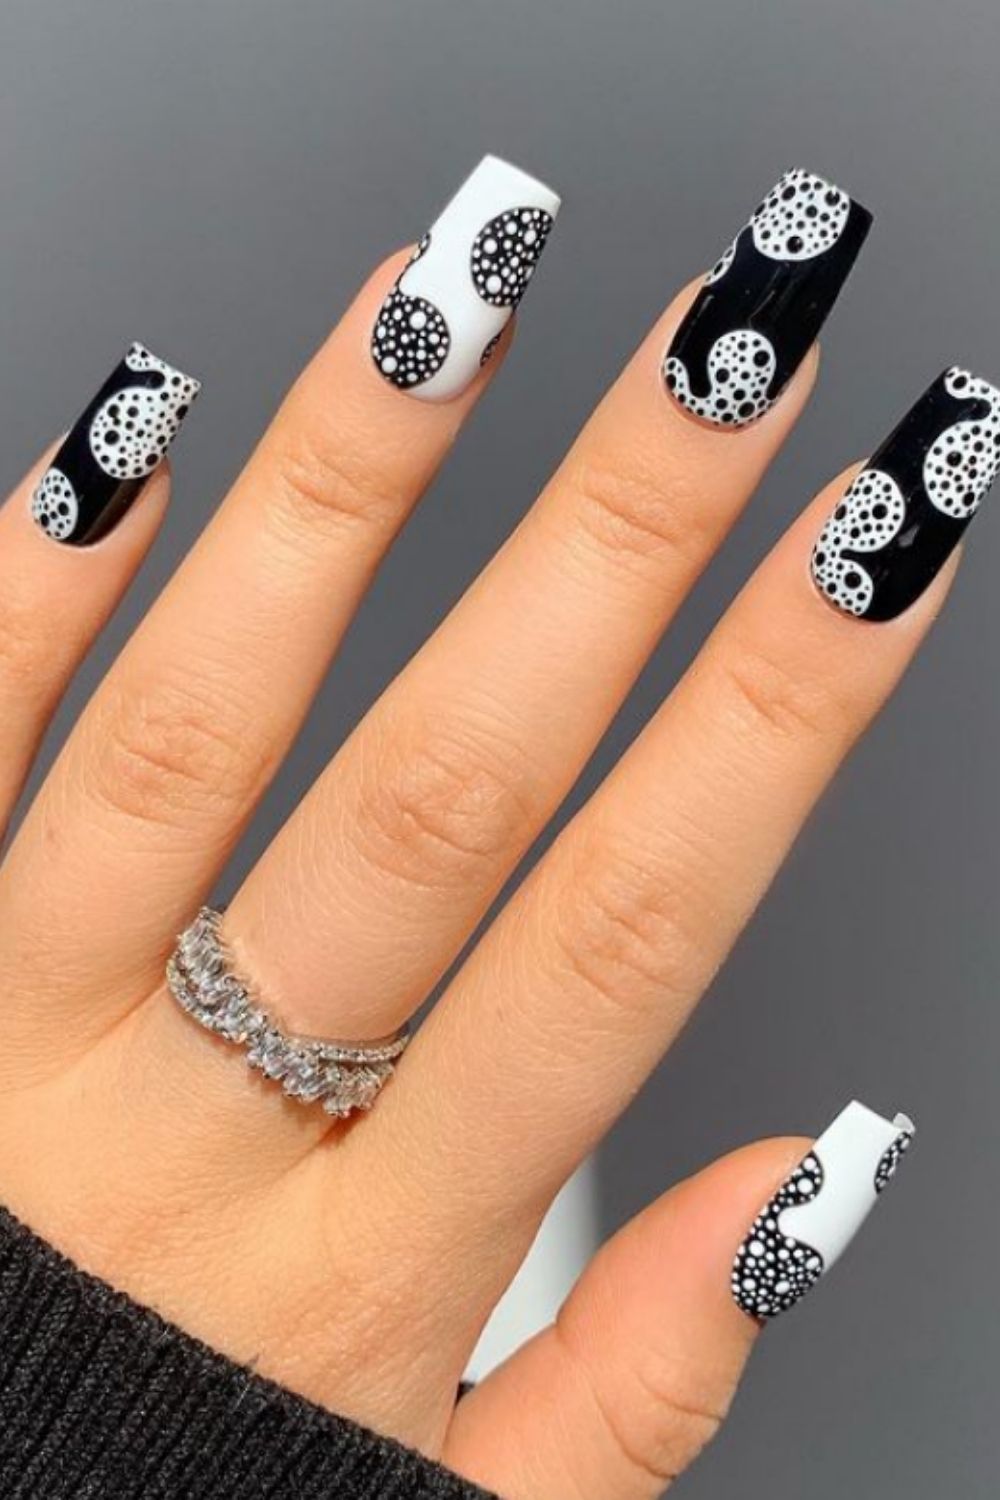 Elegant White Nail Design To Try For A Party In 2021!